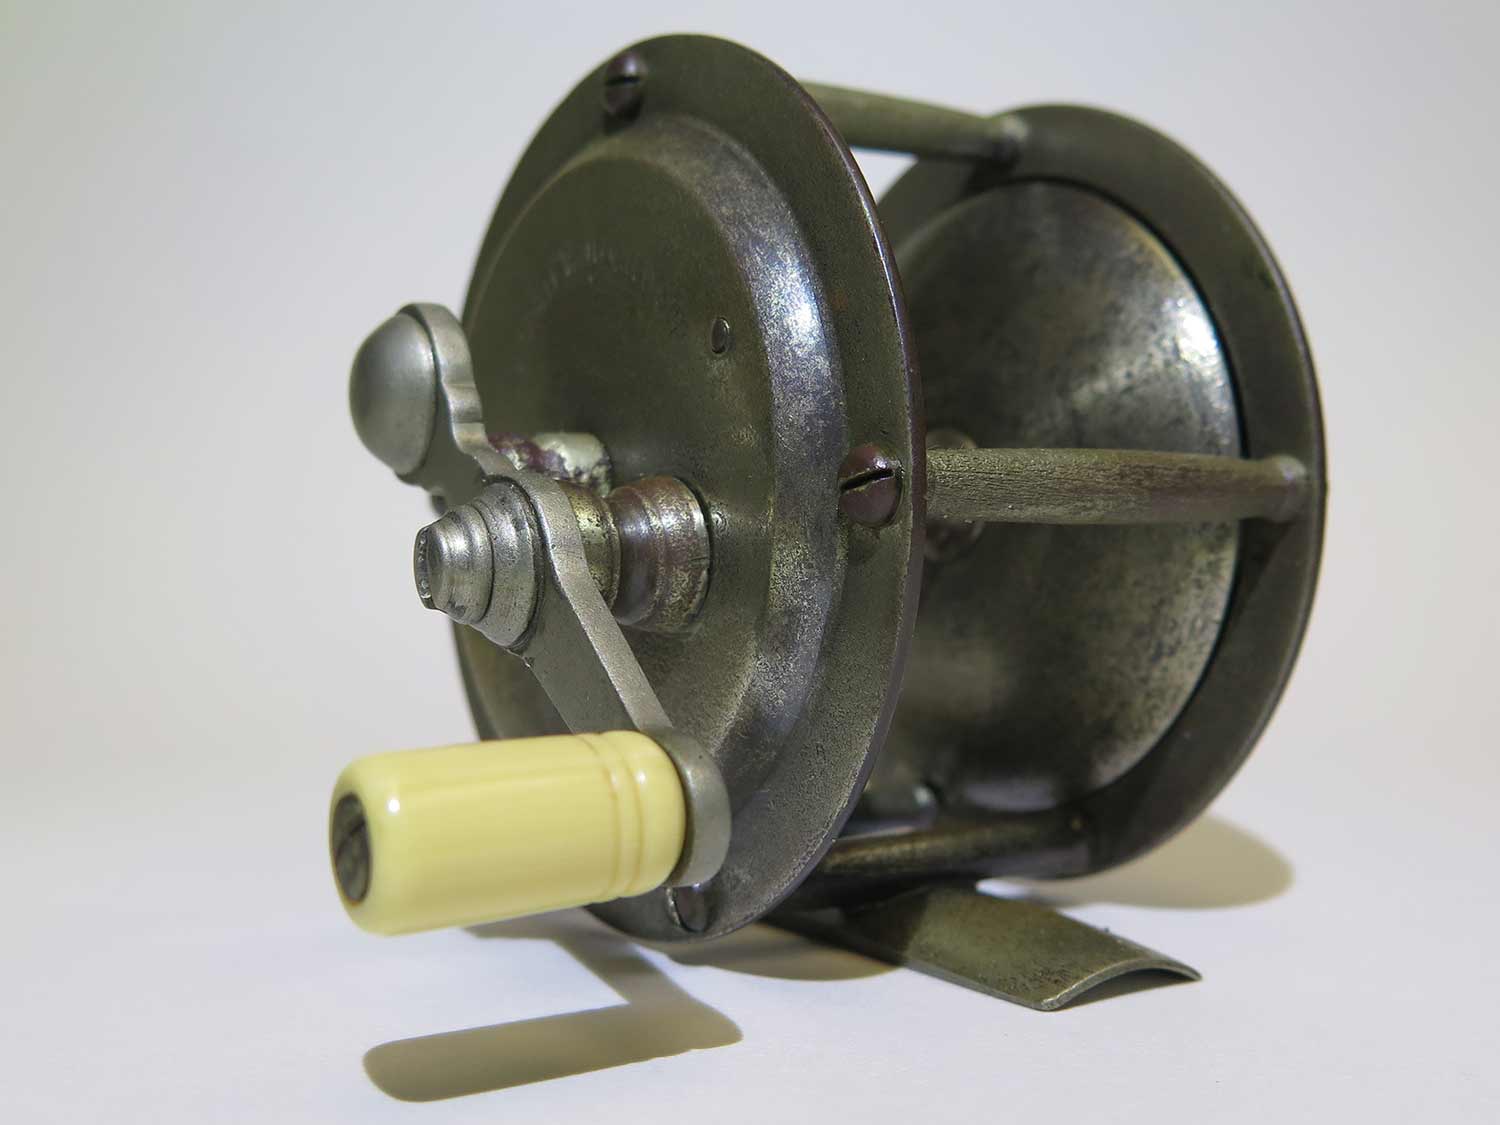 Coxe Vintage Fishing Reels for sale